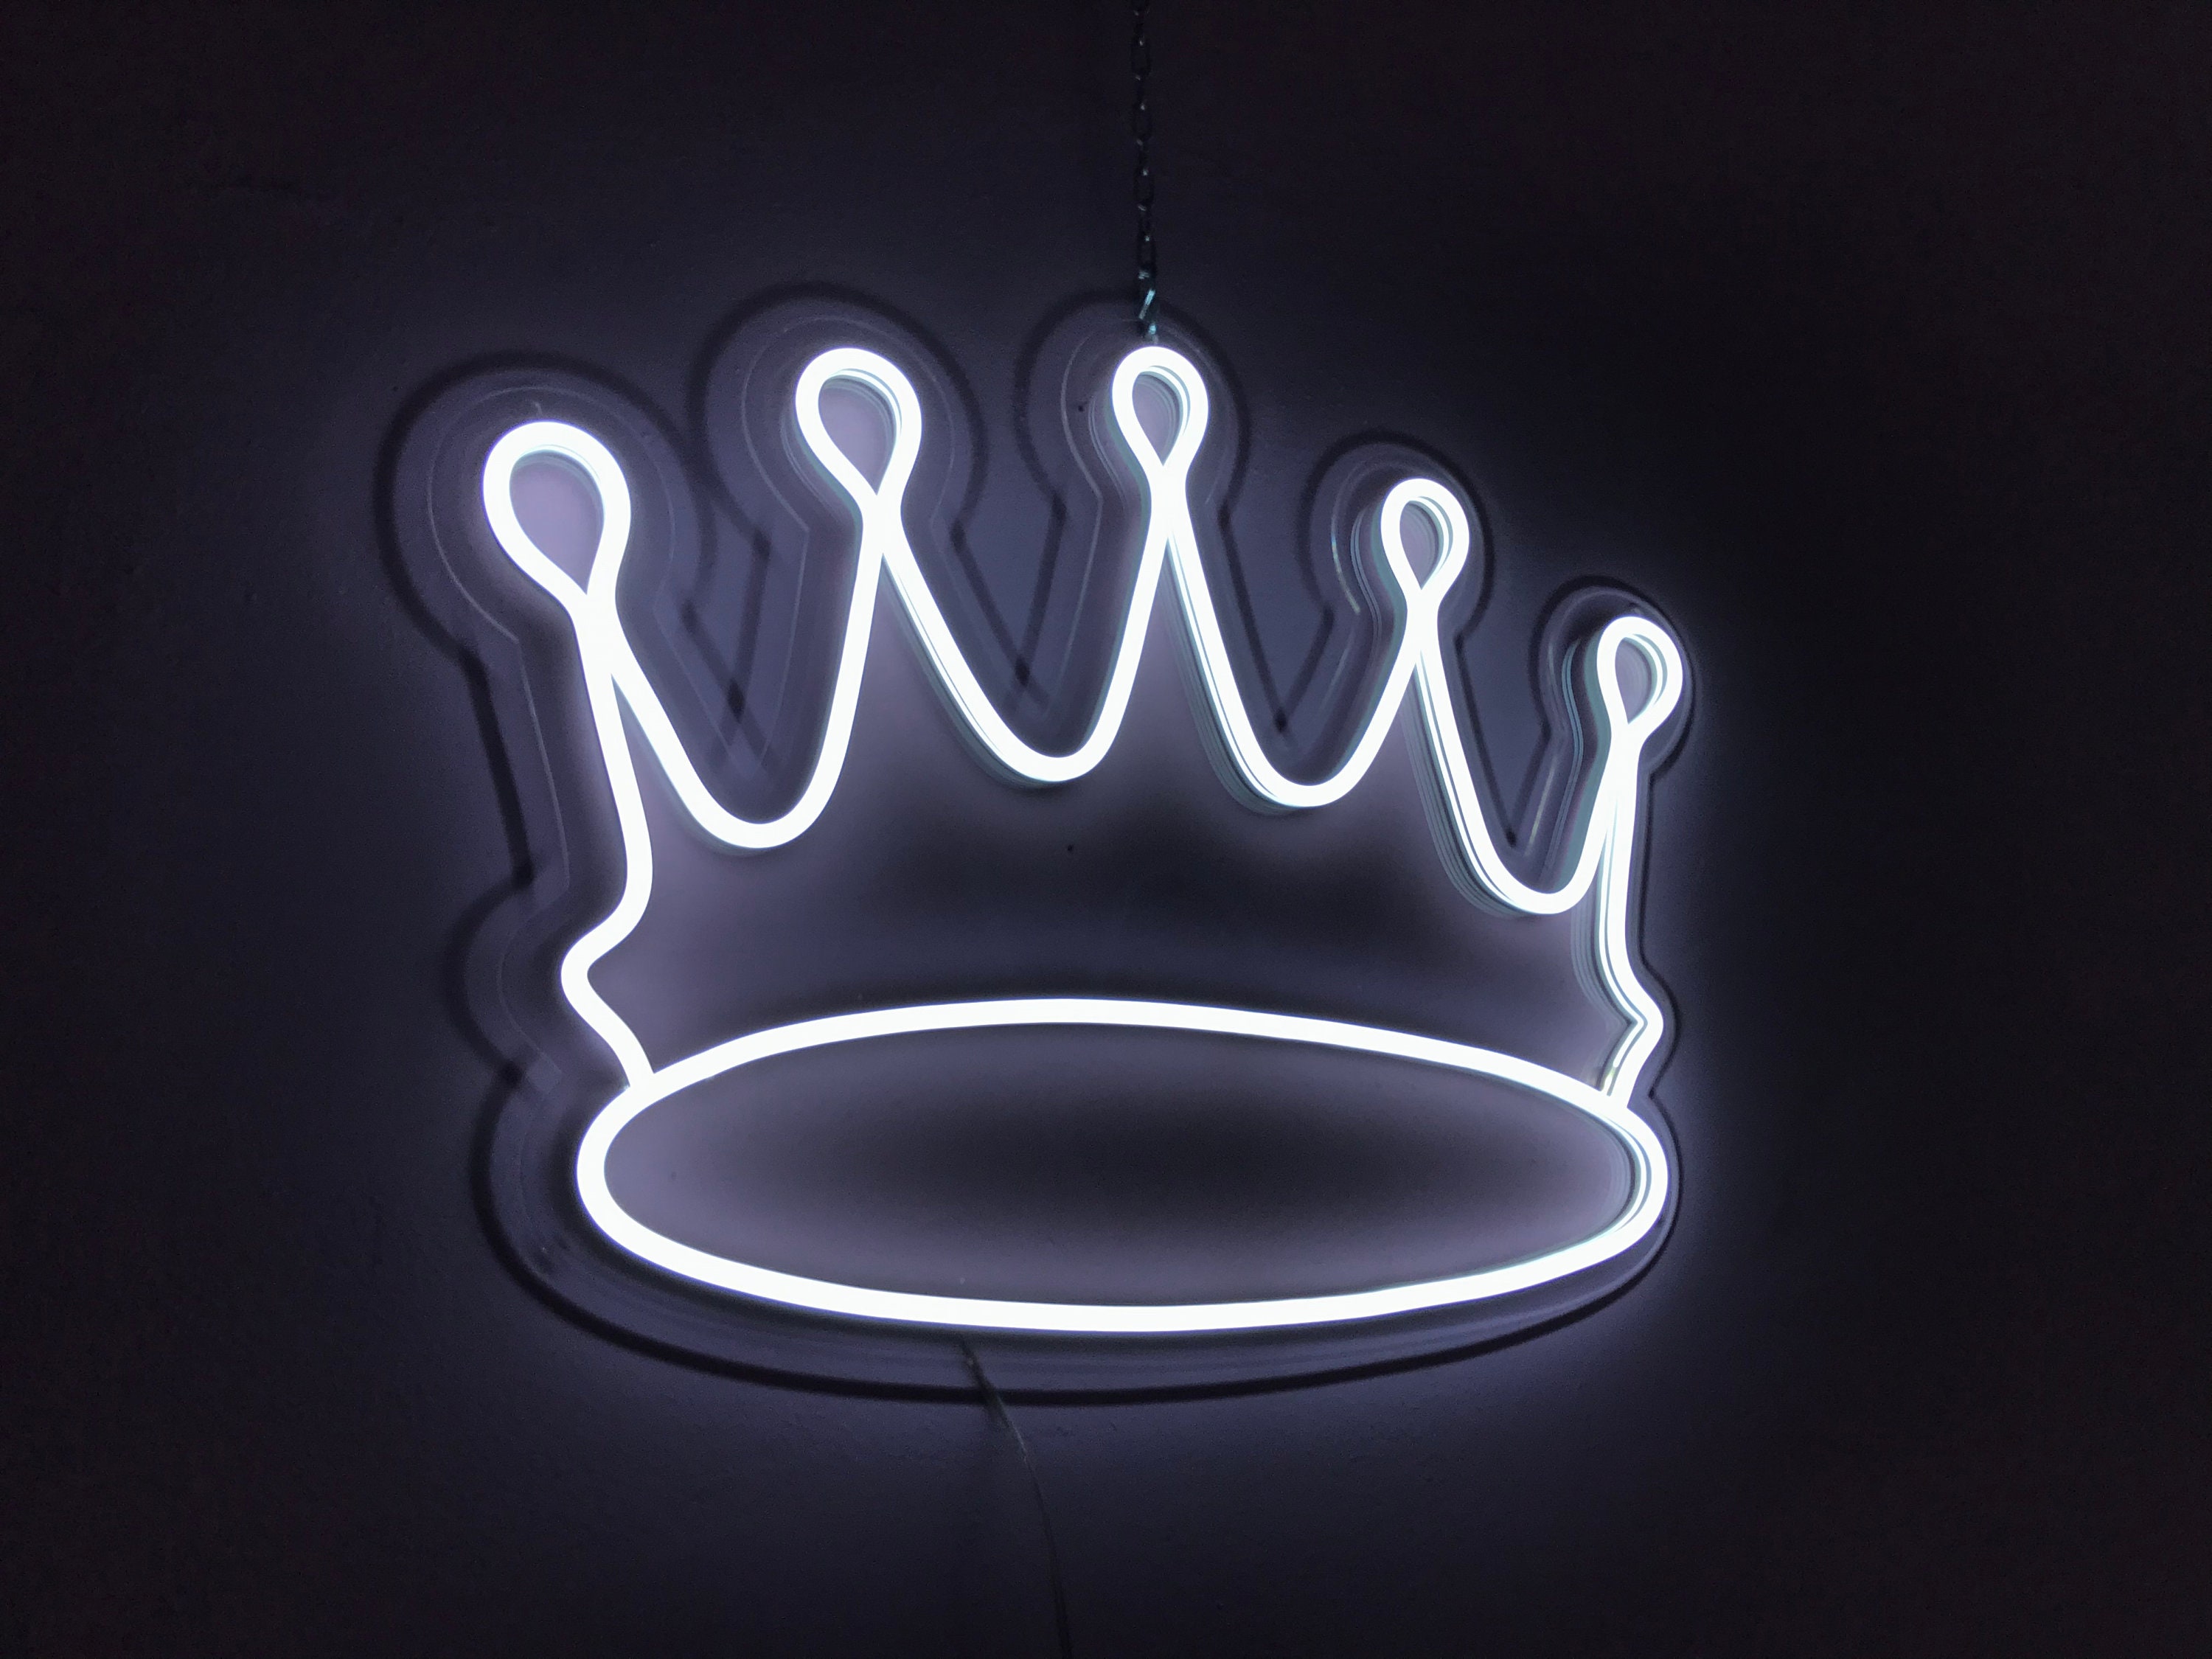 Crown LED Neon Sign King Crown Neon Art Crown Wall Lamp | Etsy